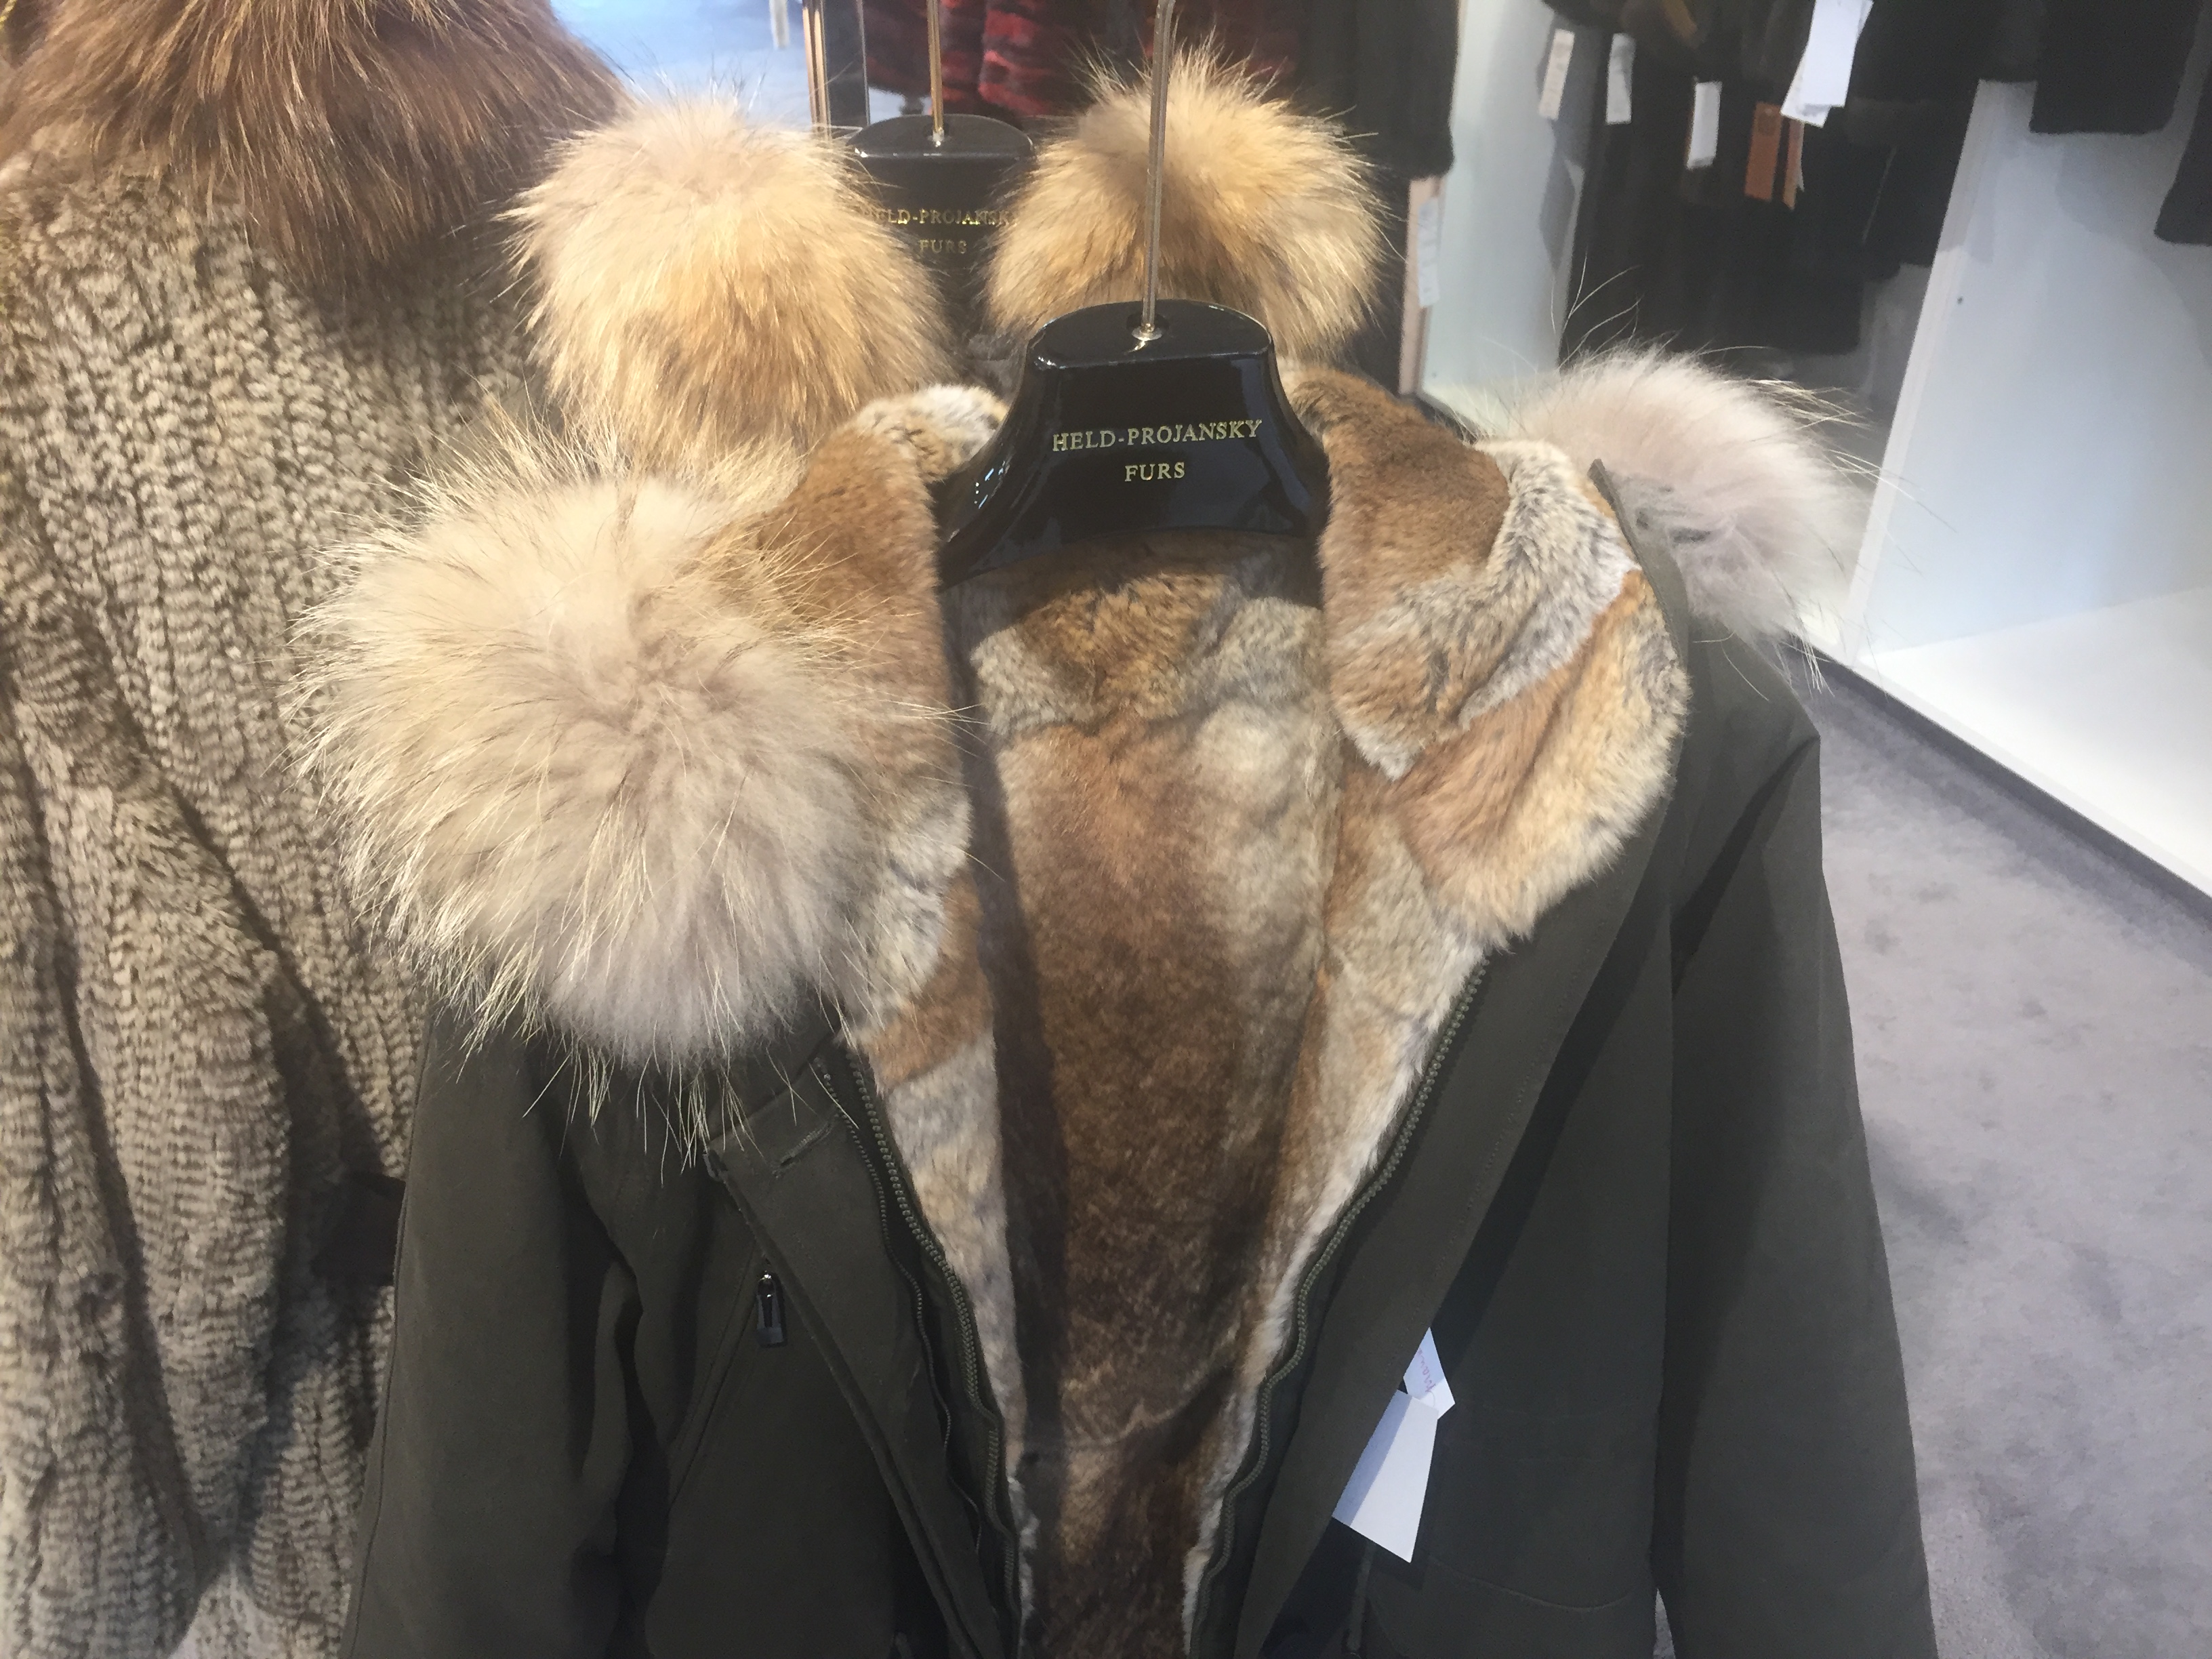 New Fashion Arrivals in Rochester NY by Held Projansky Furs